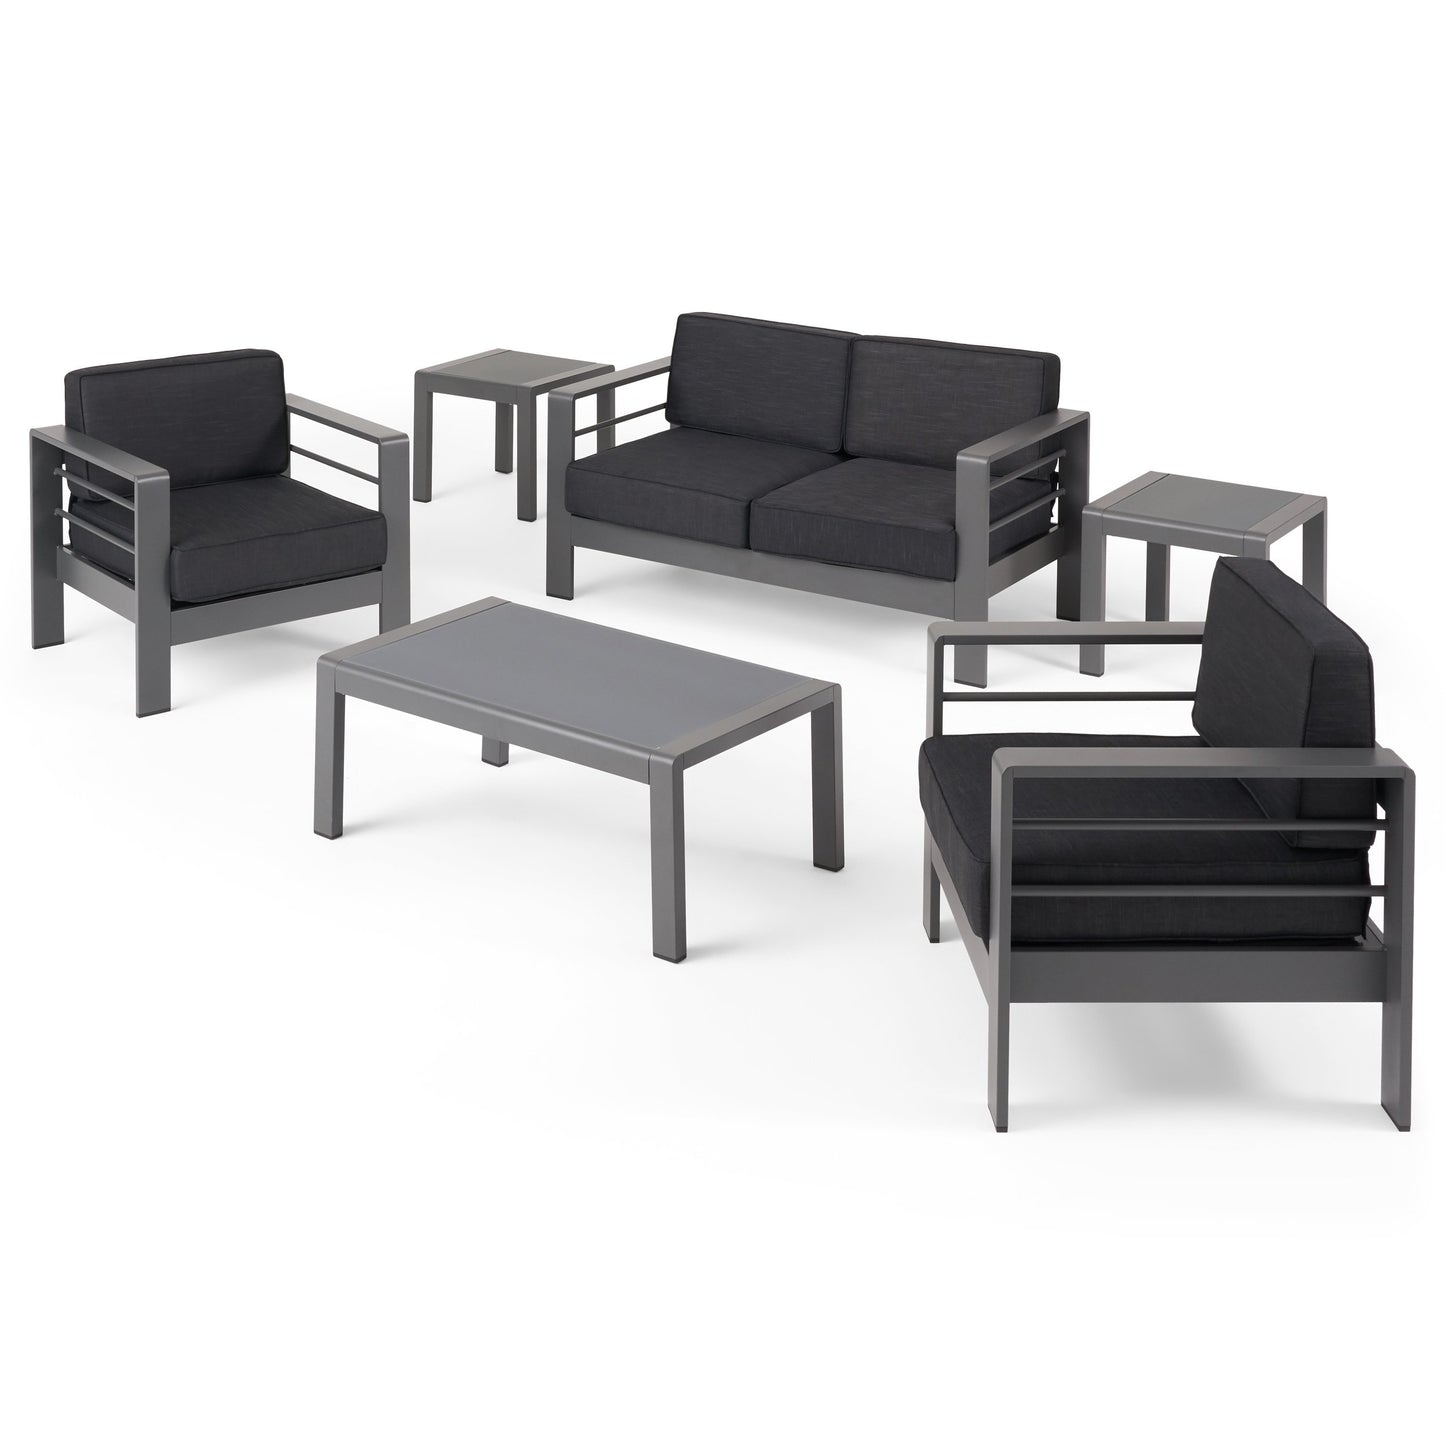 Snowy Coral Outdoor 4 Seater Aluminum Chat Set with 2 Side Table